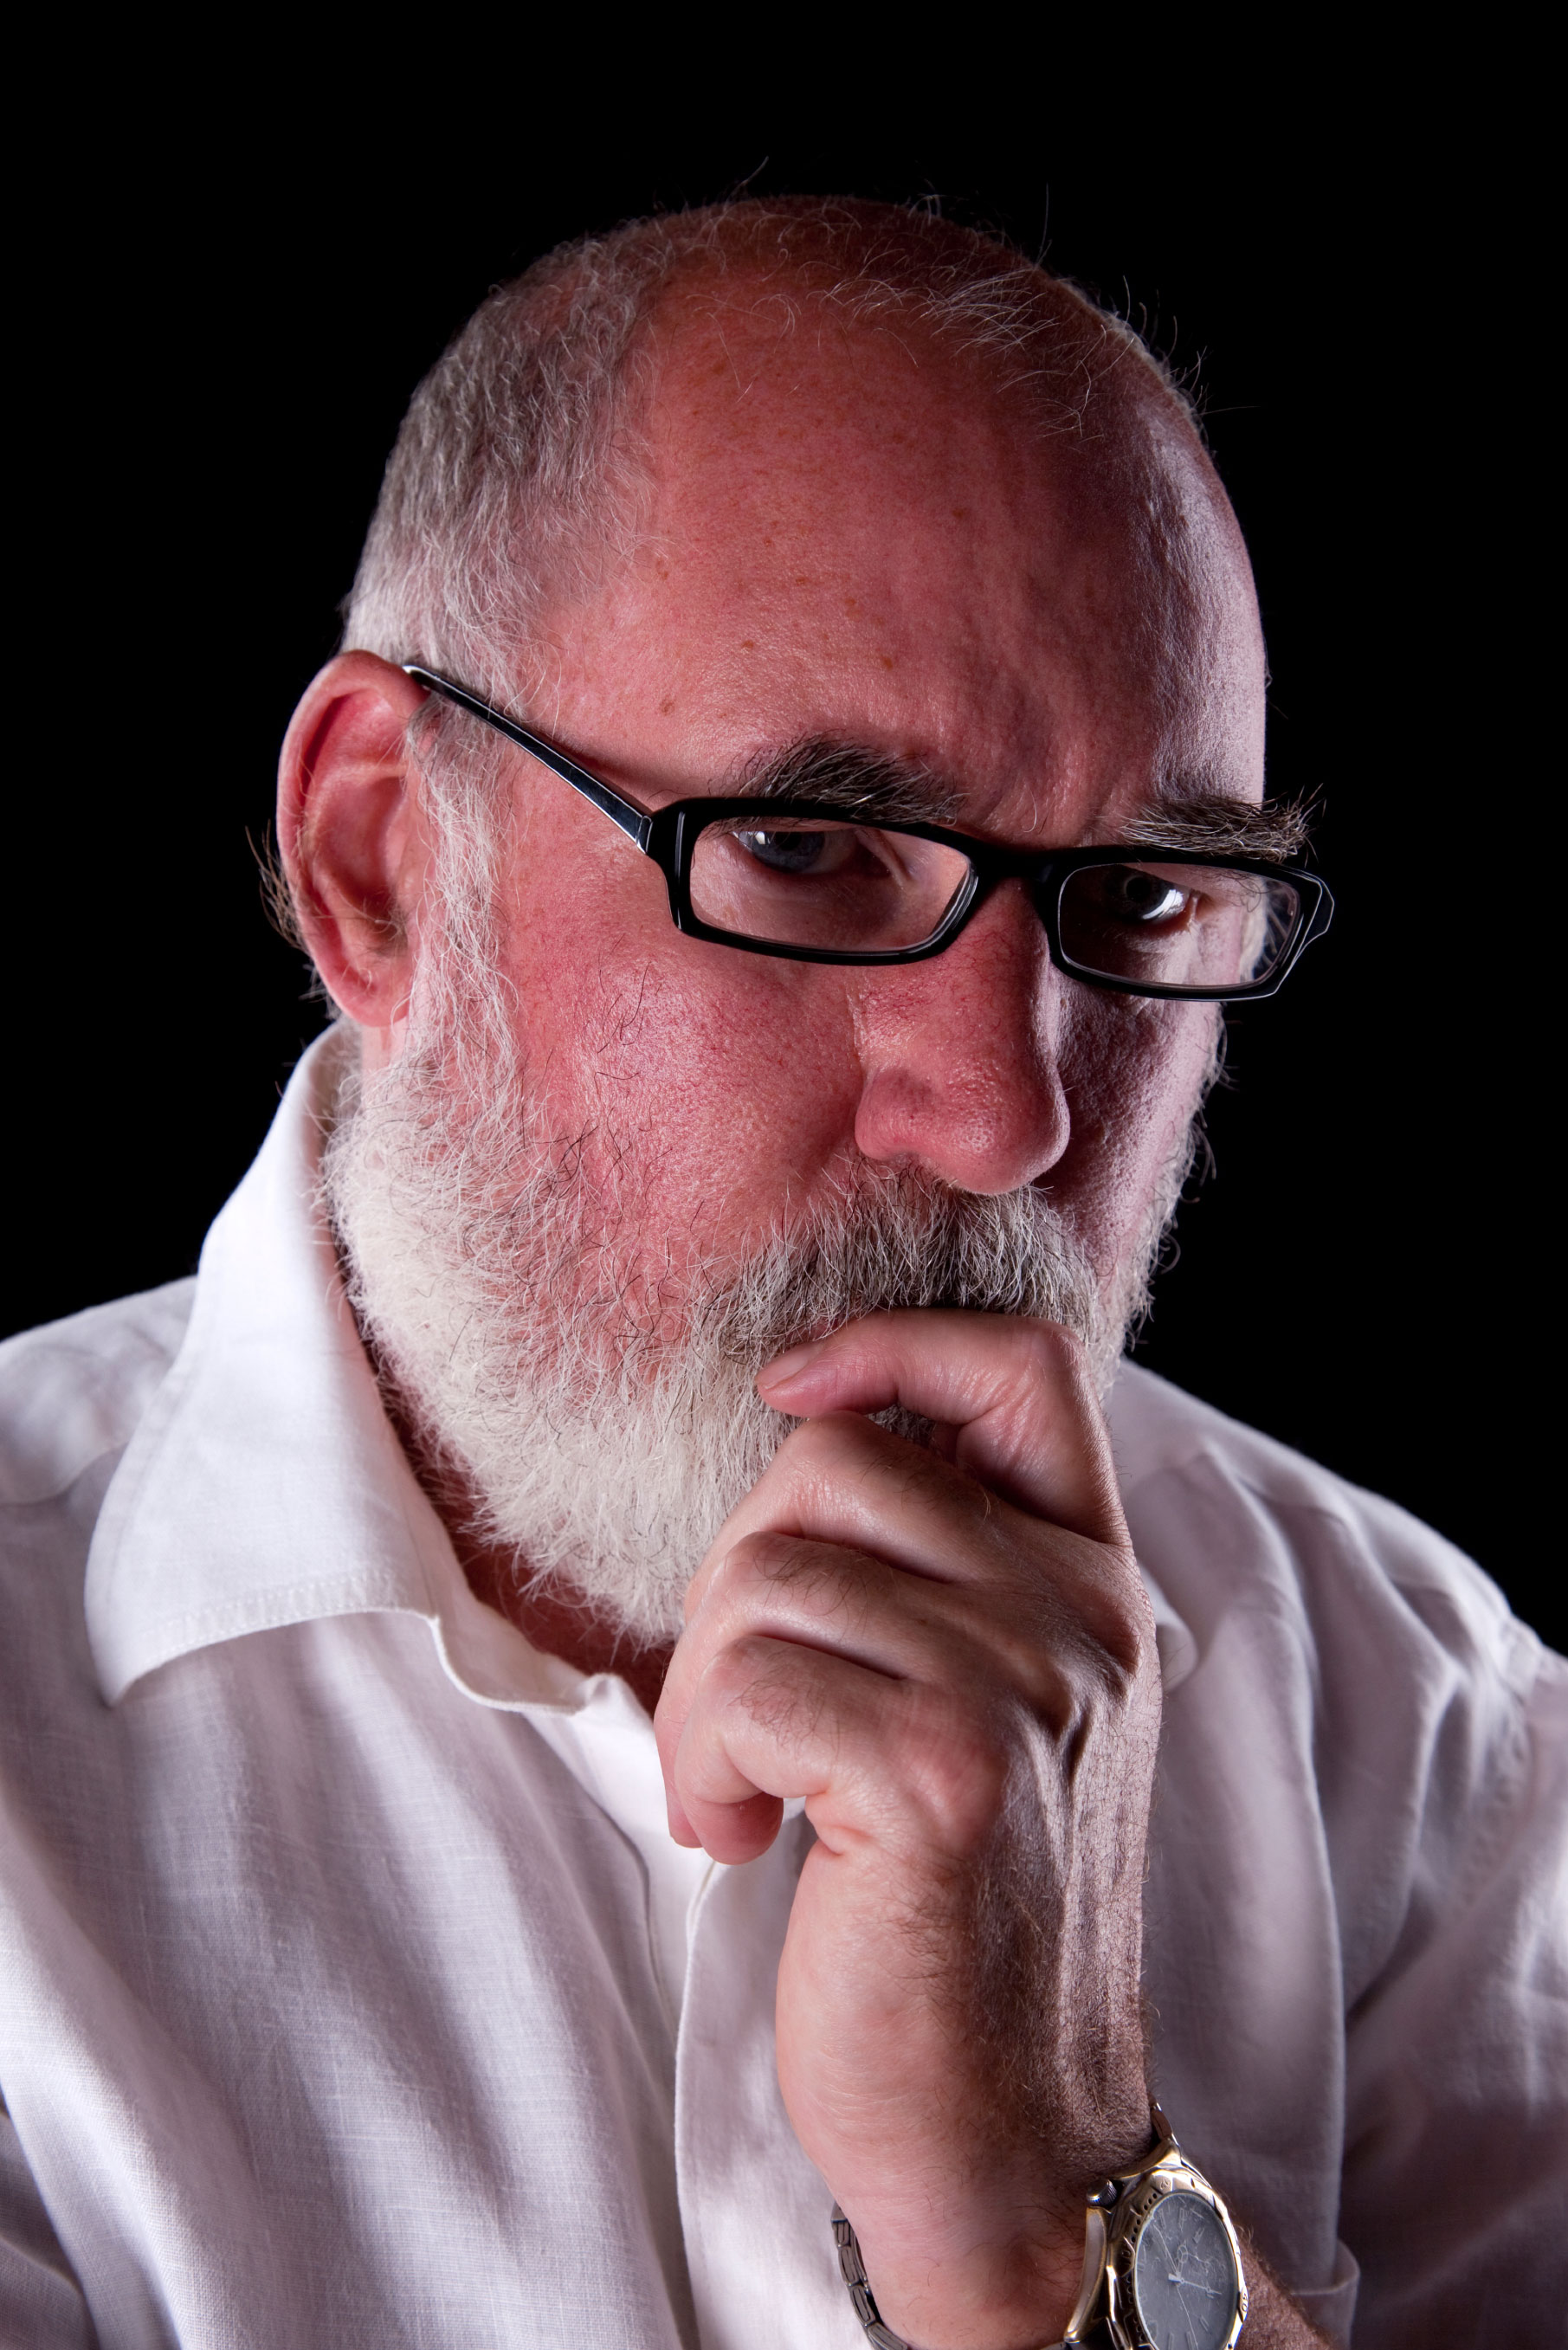 Bearded man in his 60s lost in thought.